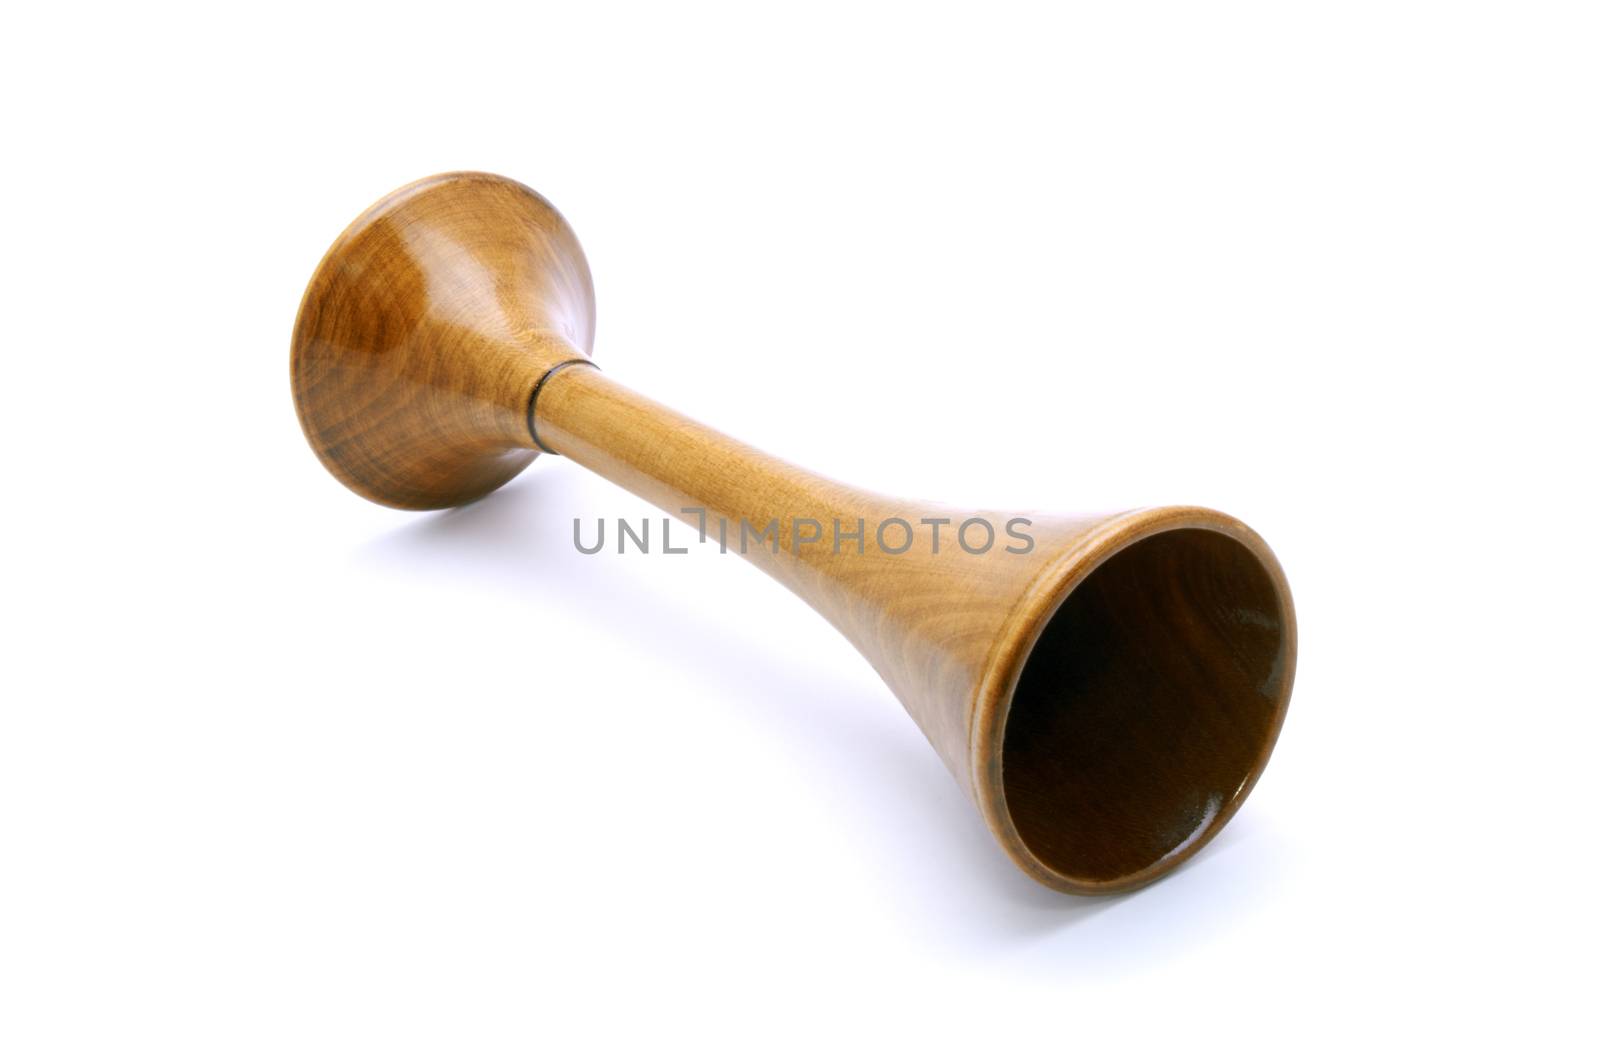 Wooden stethoscope isolated on a white background by alarich